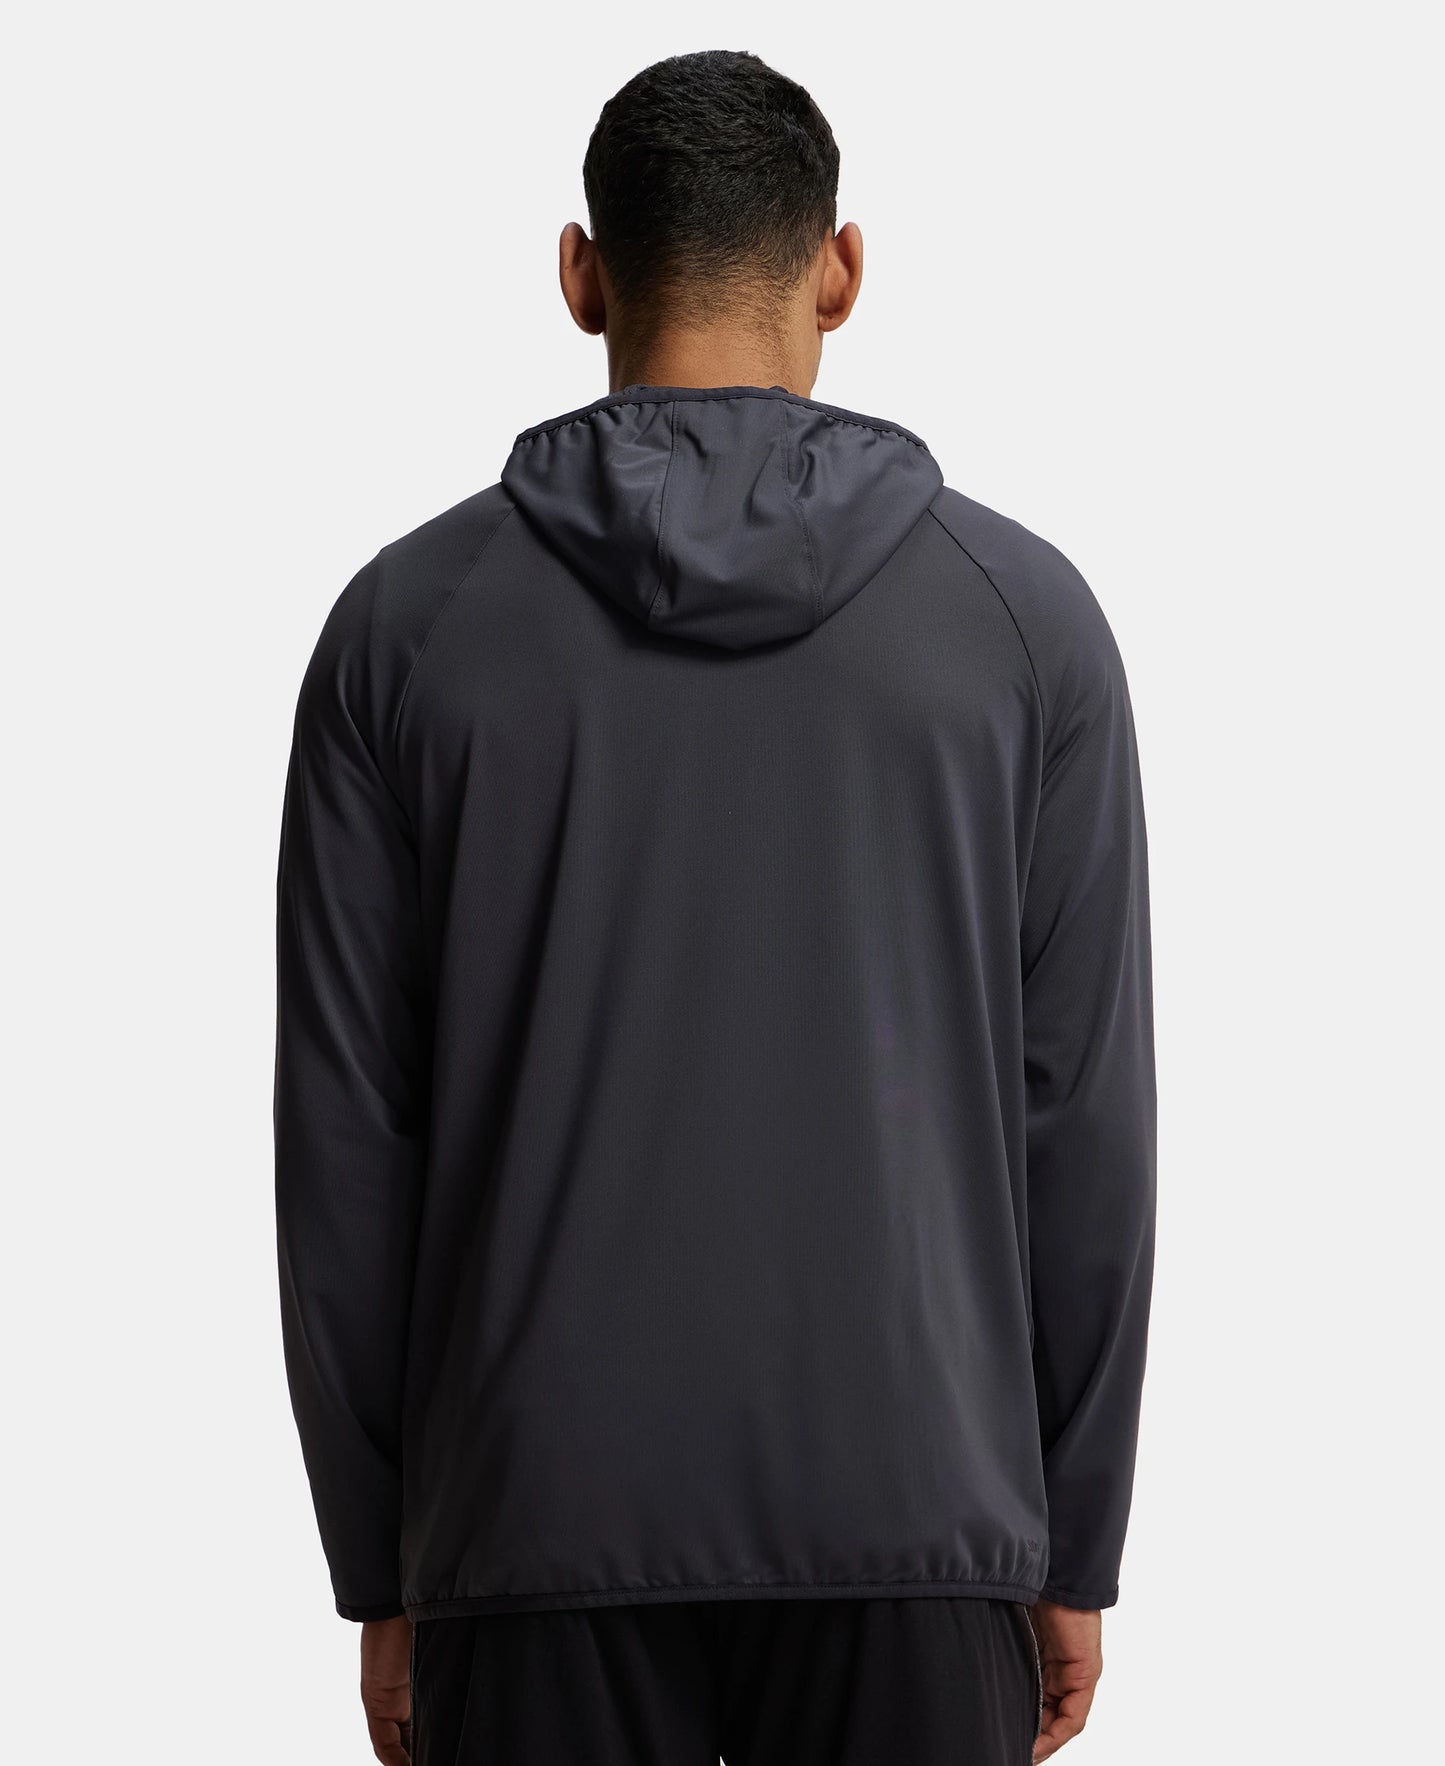 Microfiber Elastane Stretch Performance Hoodie Jacket with StayDry and StayFresh Technology - Graphite-3